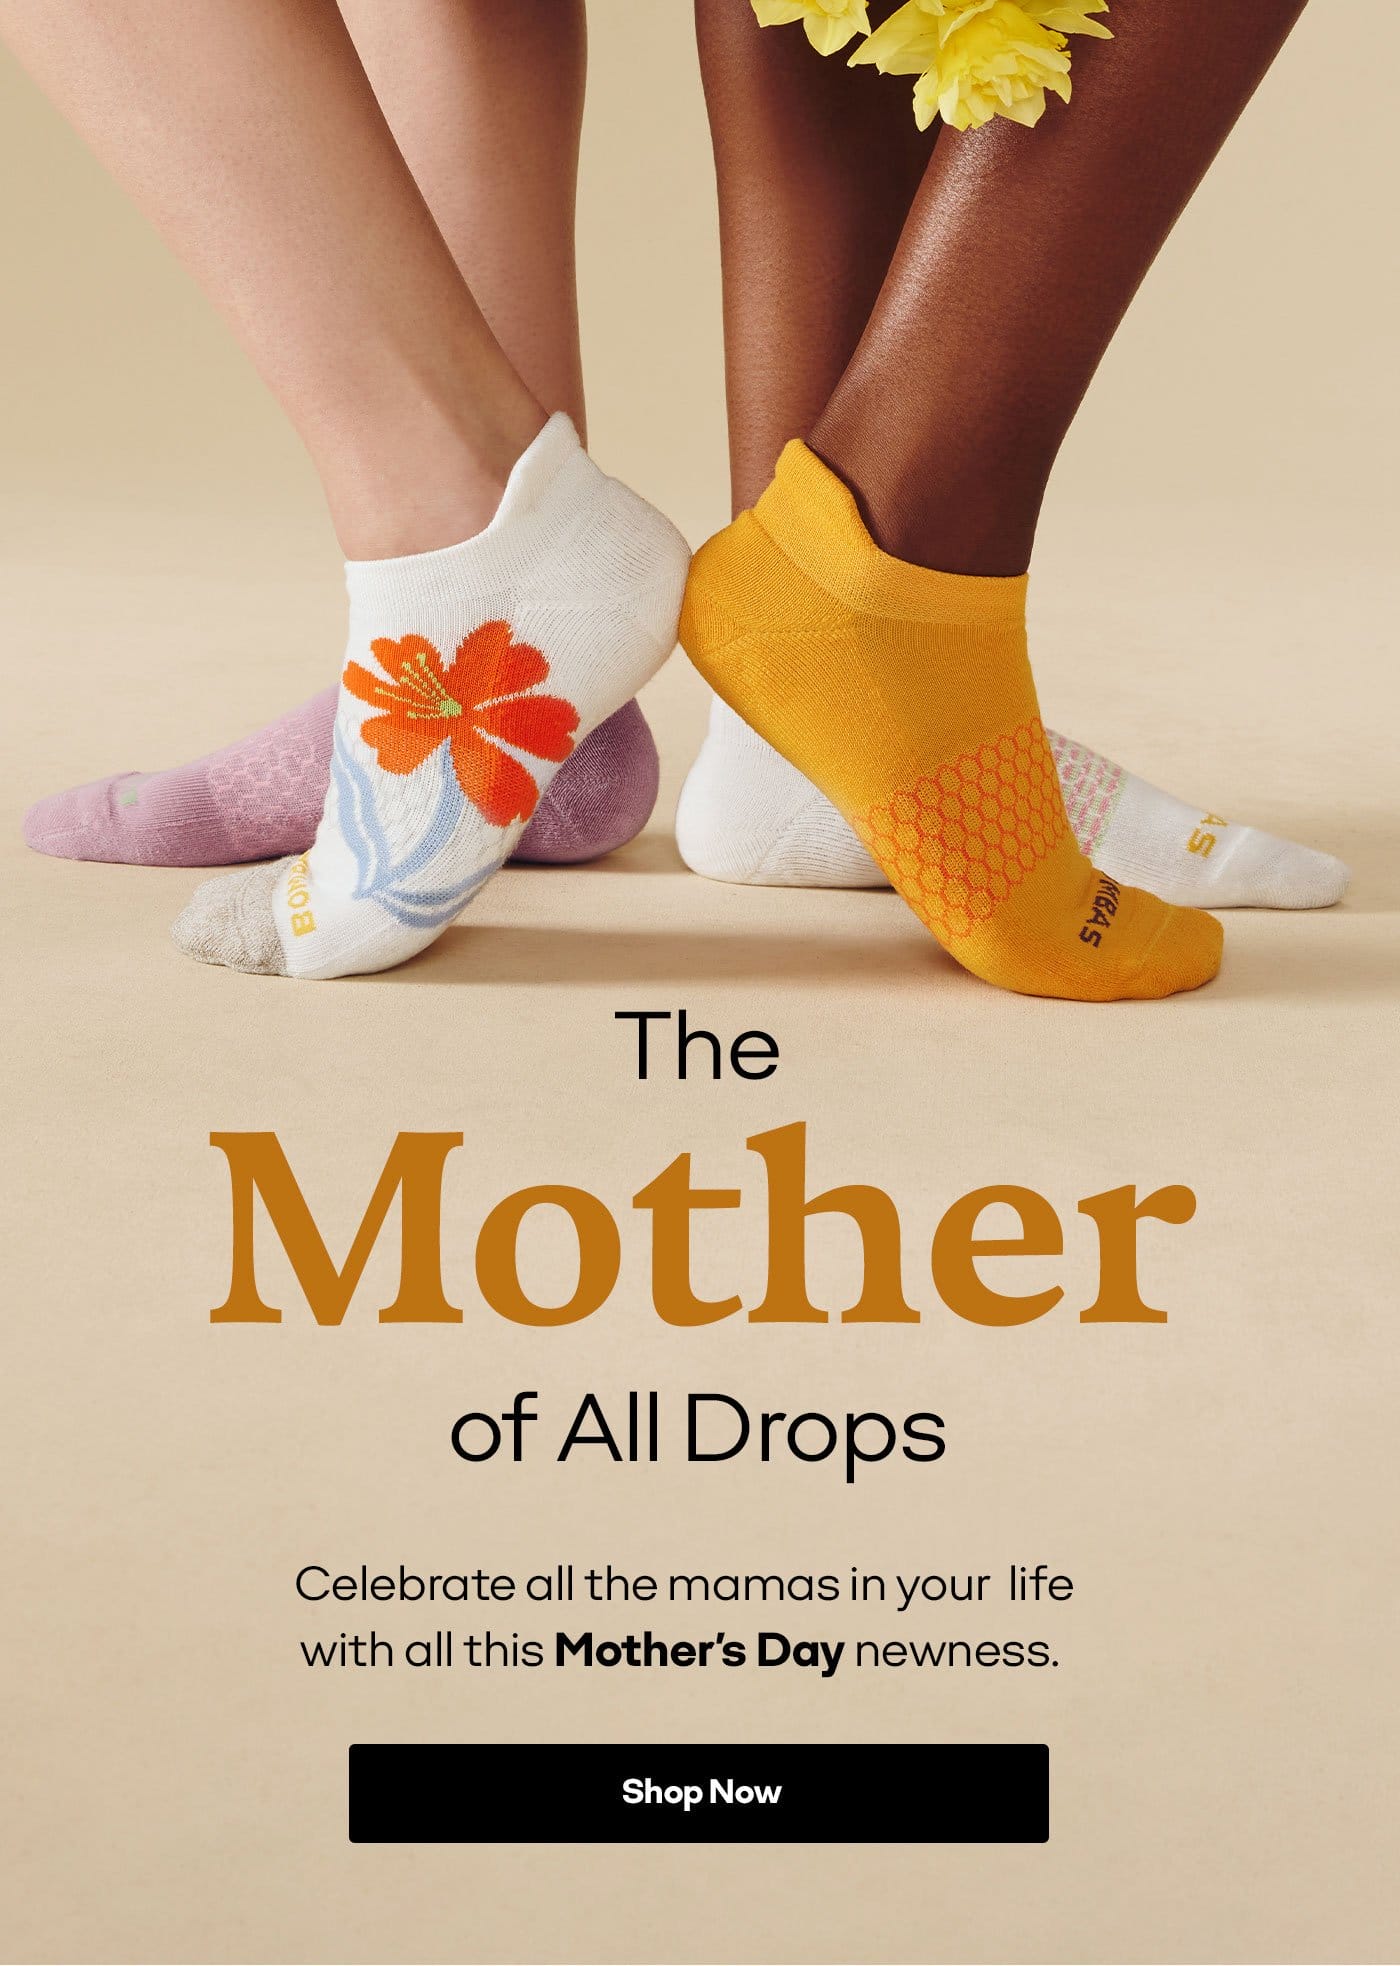 The Mother of All Drops | Celebrate all the mamas in your life with all this Mother's Day newness. | SHOP NOW